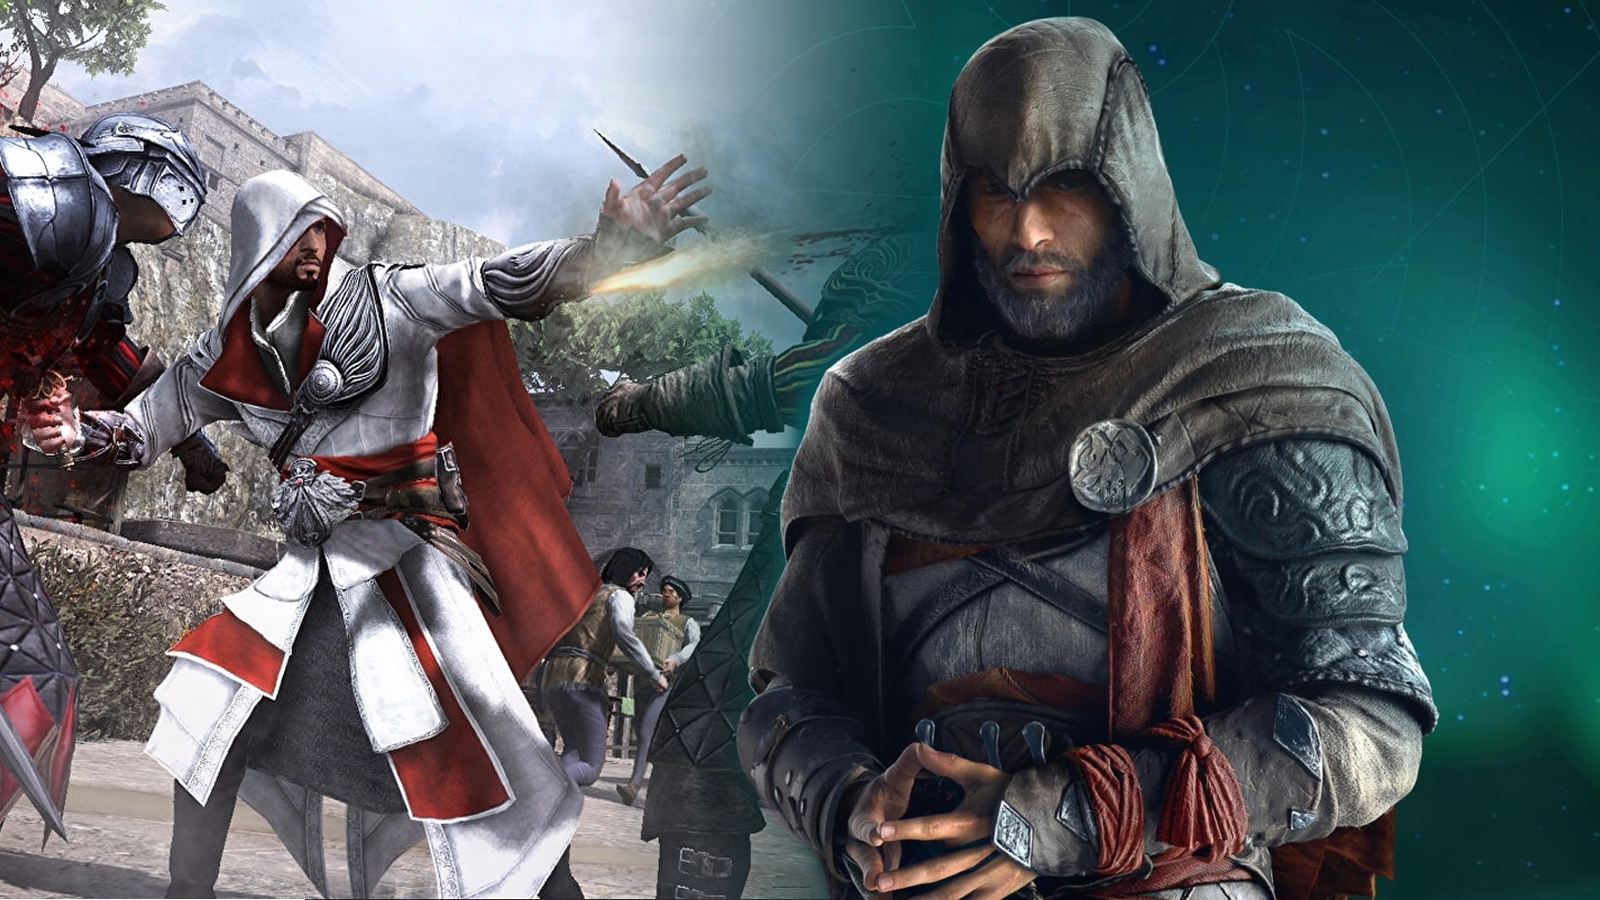 A stealthy new Assassin's Creed game is coming in 2023